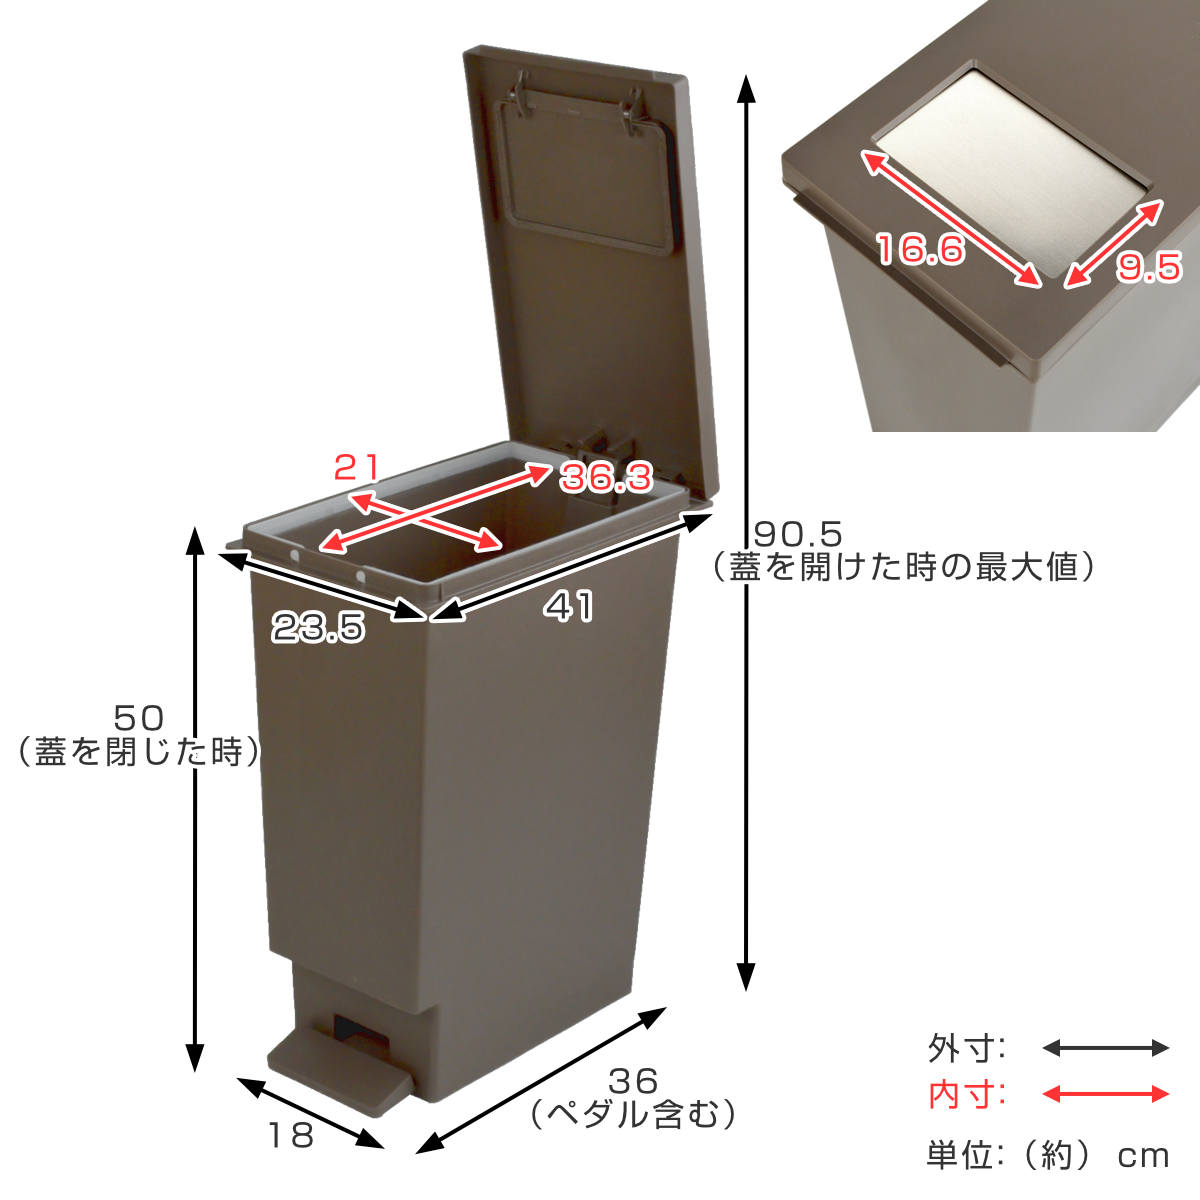  waste basket 30Lyu need push & pedal ( 30 liter cover attaching minute another kitchen dumpster slim minute another waste basket shelves under counter under )